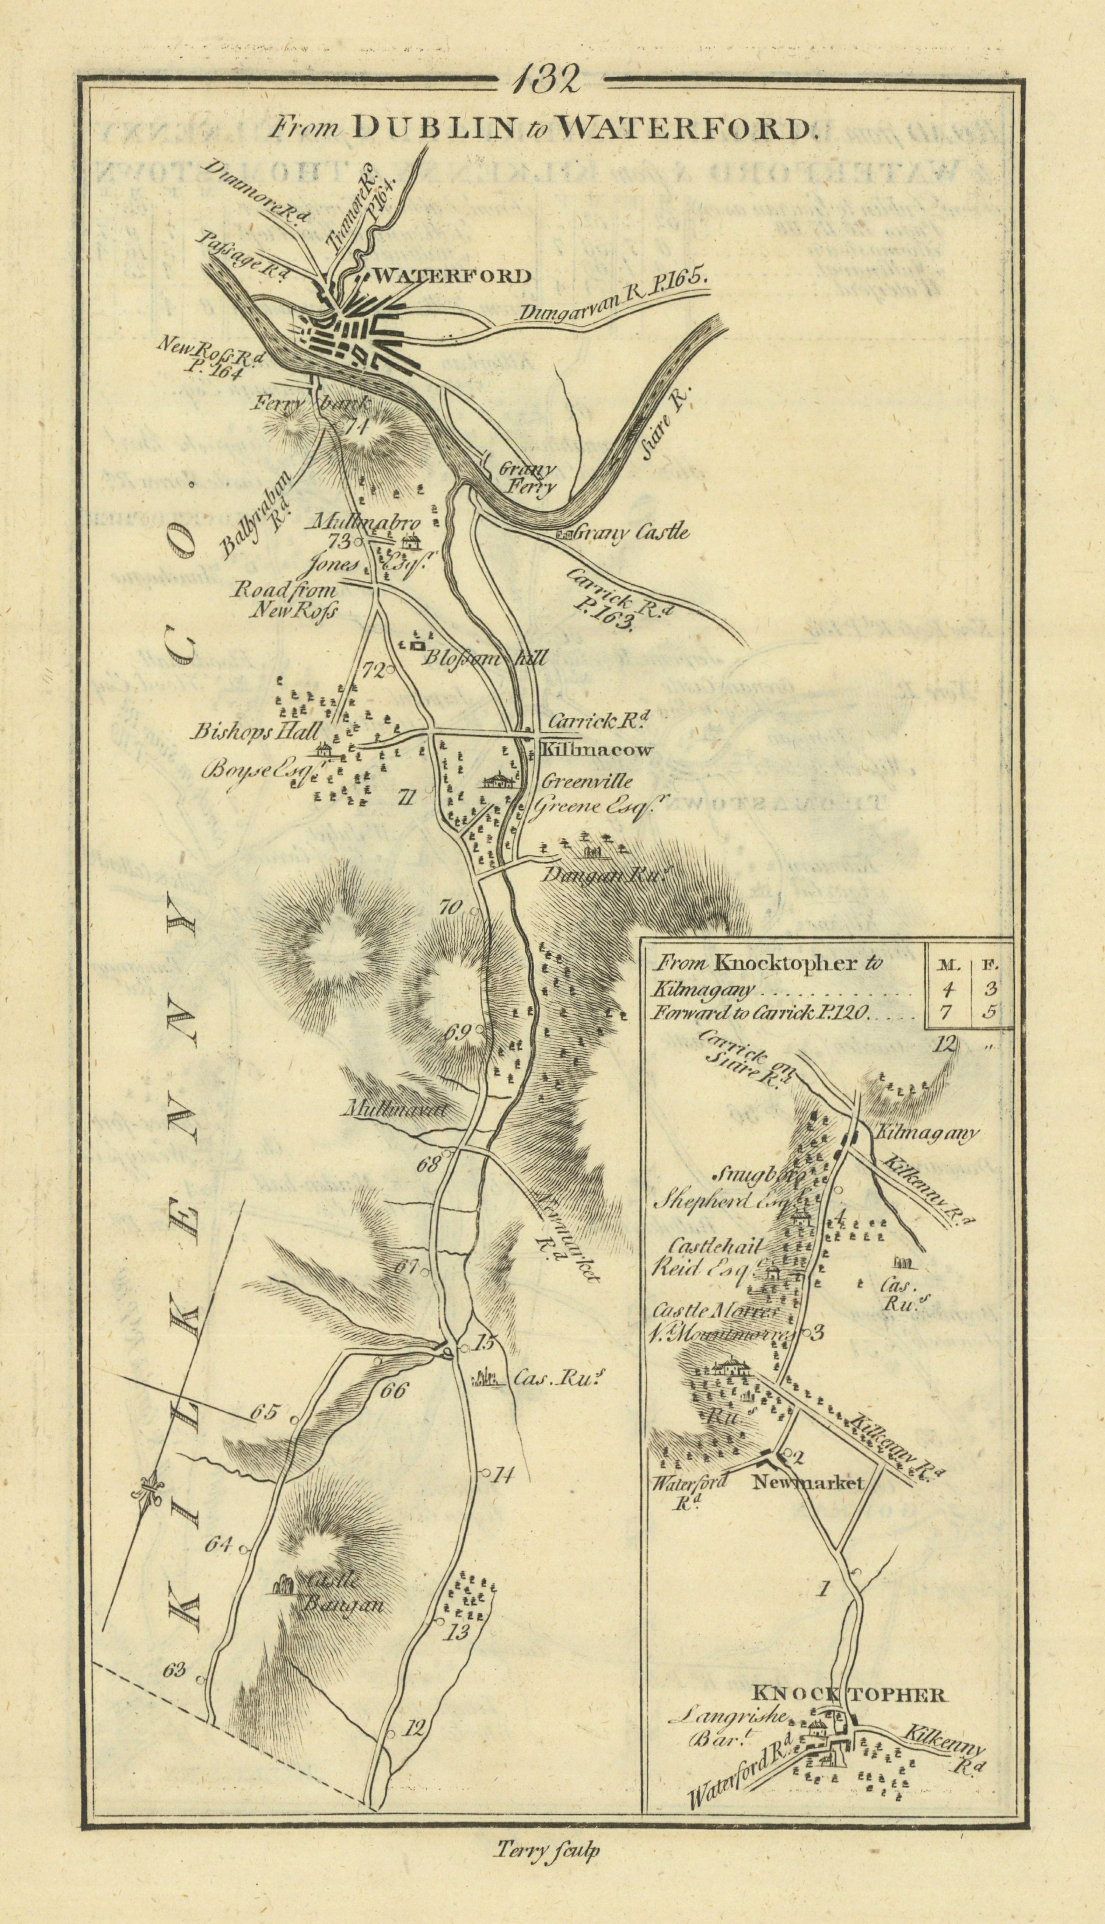 #132 Dublin to Waterford. Kilmacow Newmarket Knocktopher TAYLOR/SKINNER 1778 map